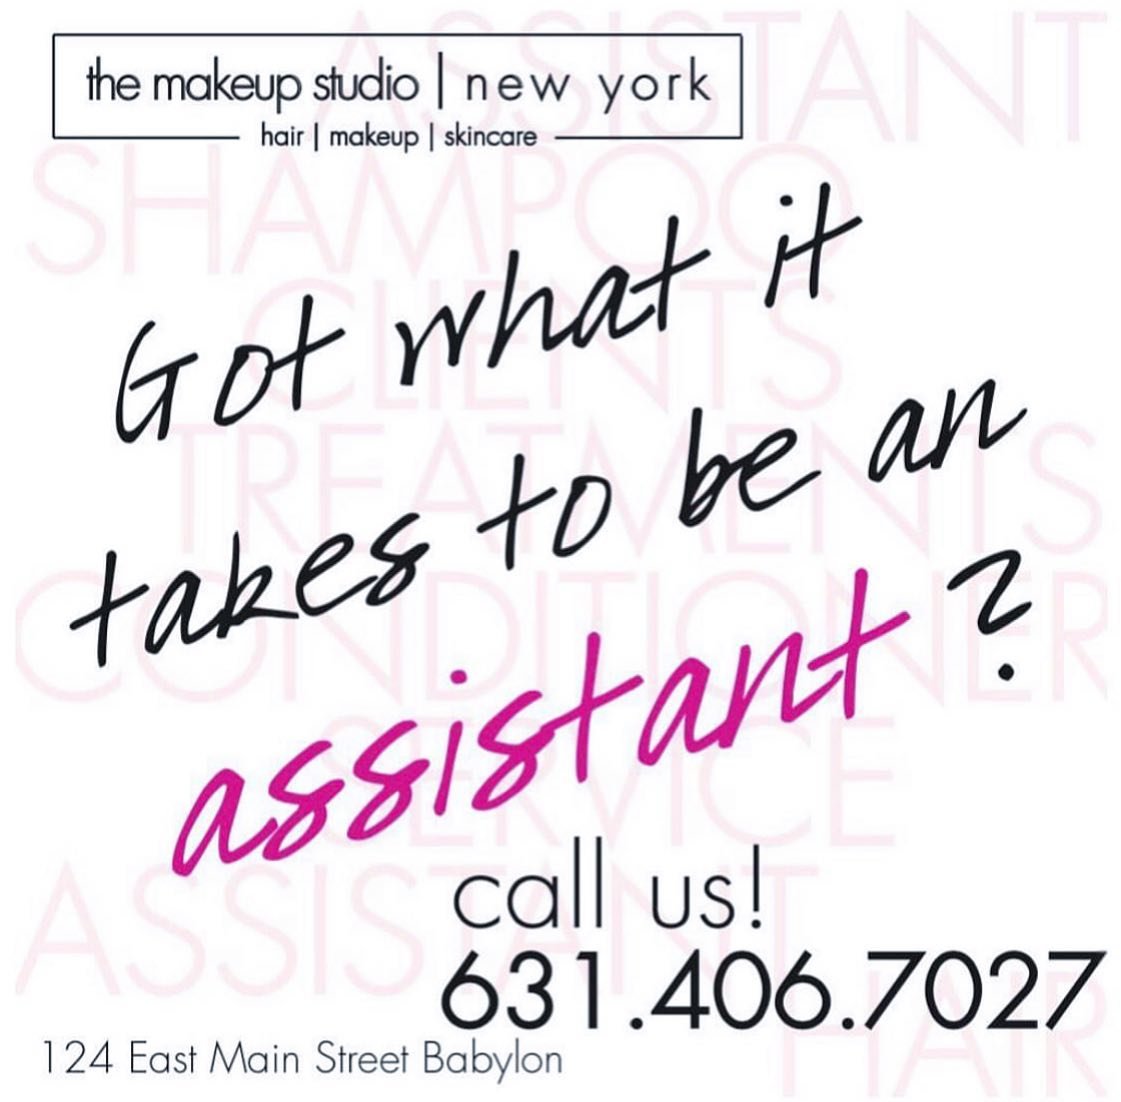 full time assistant position now available!! call us to set up an interview! can&rsquo;t wait to meet you!
&bull;
&bull;
&bull;
#themakeupstudiony #thestudiony #assist #assistant #colorist #stylist #babylonvillage #longisland #longislandny